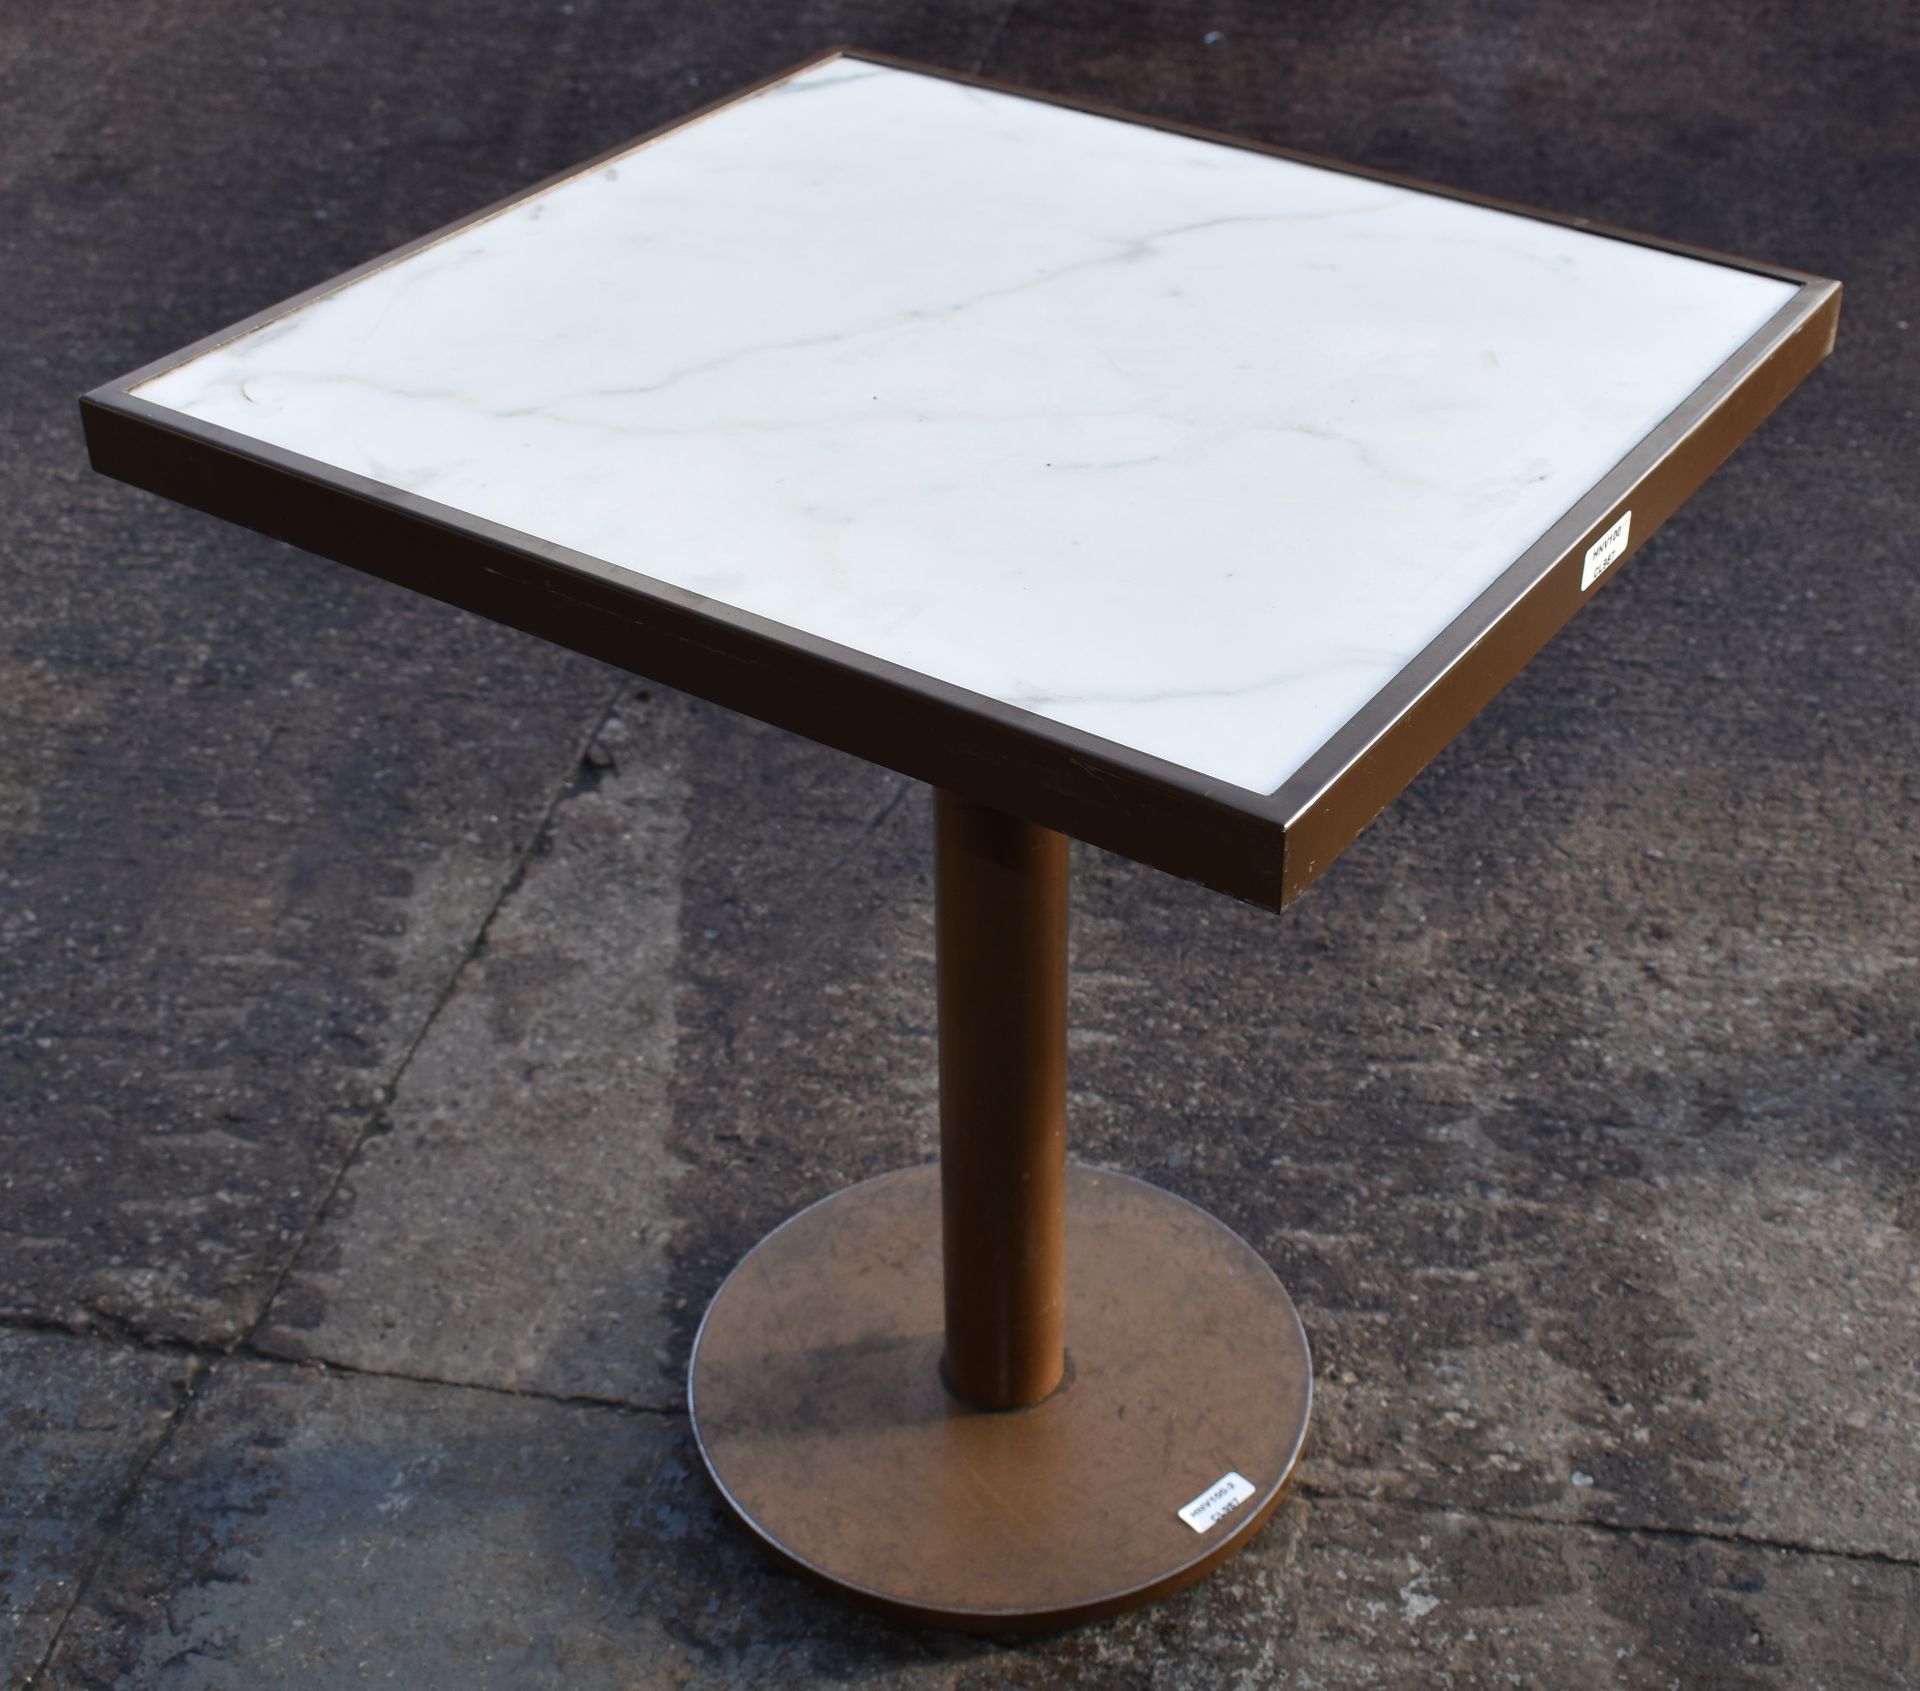 3 x Marble Topped Bistro Tables With Sturdy Metal Frames - Recently Removed From A World-renowned - Image 2 of 4